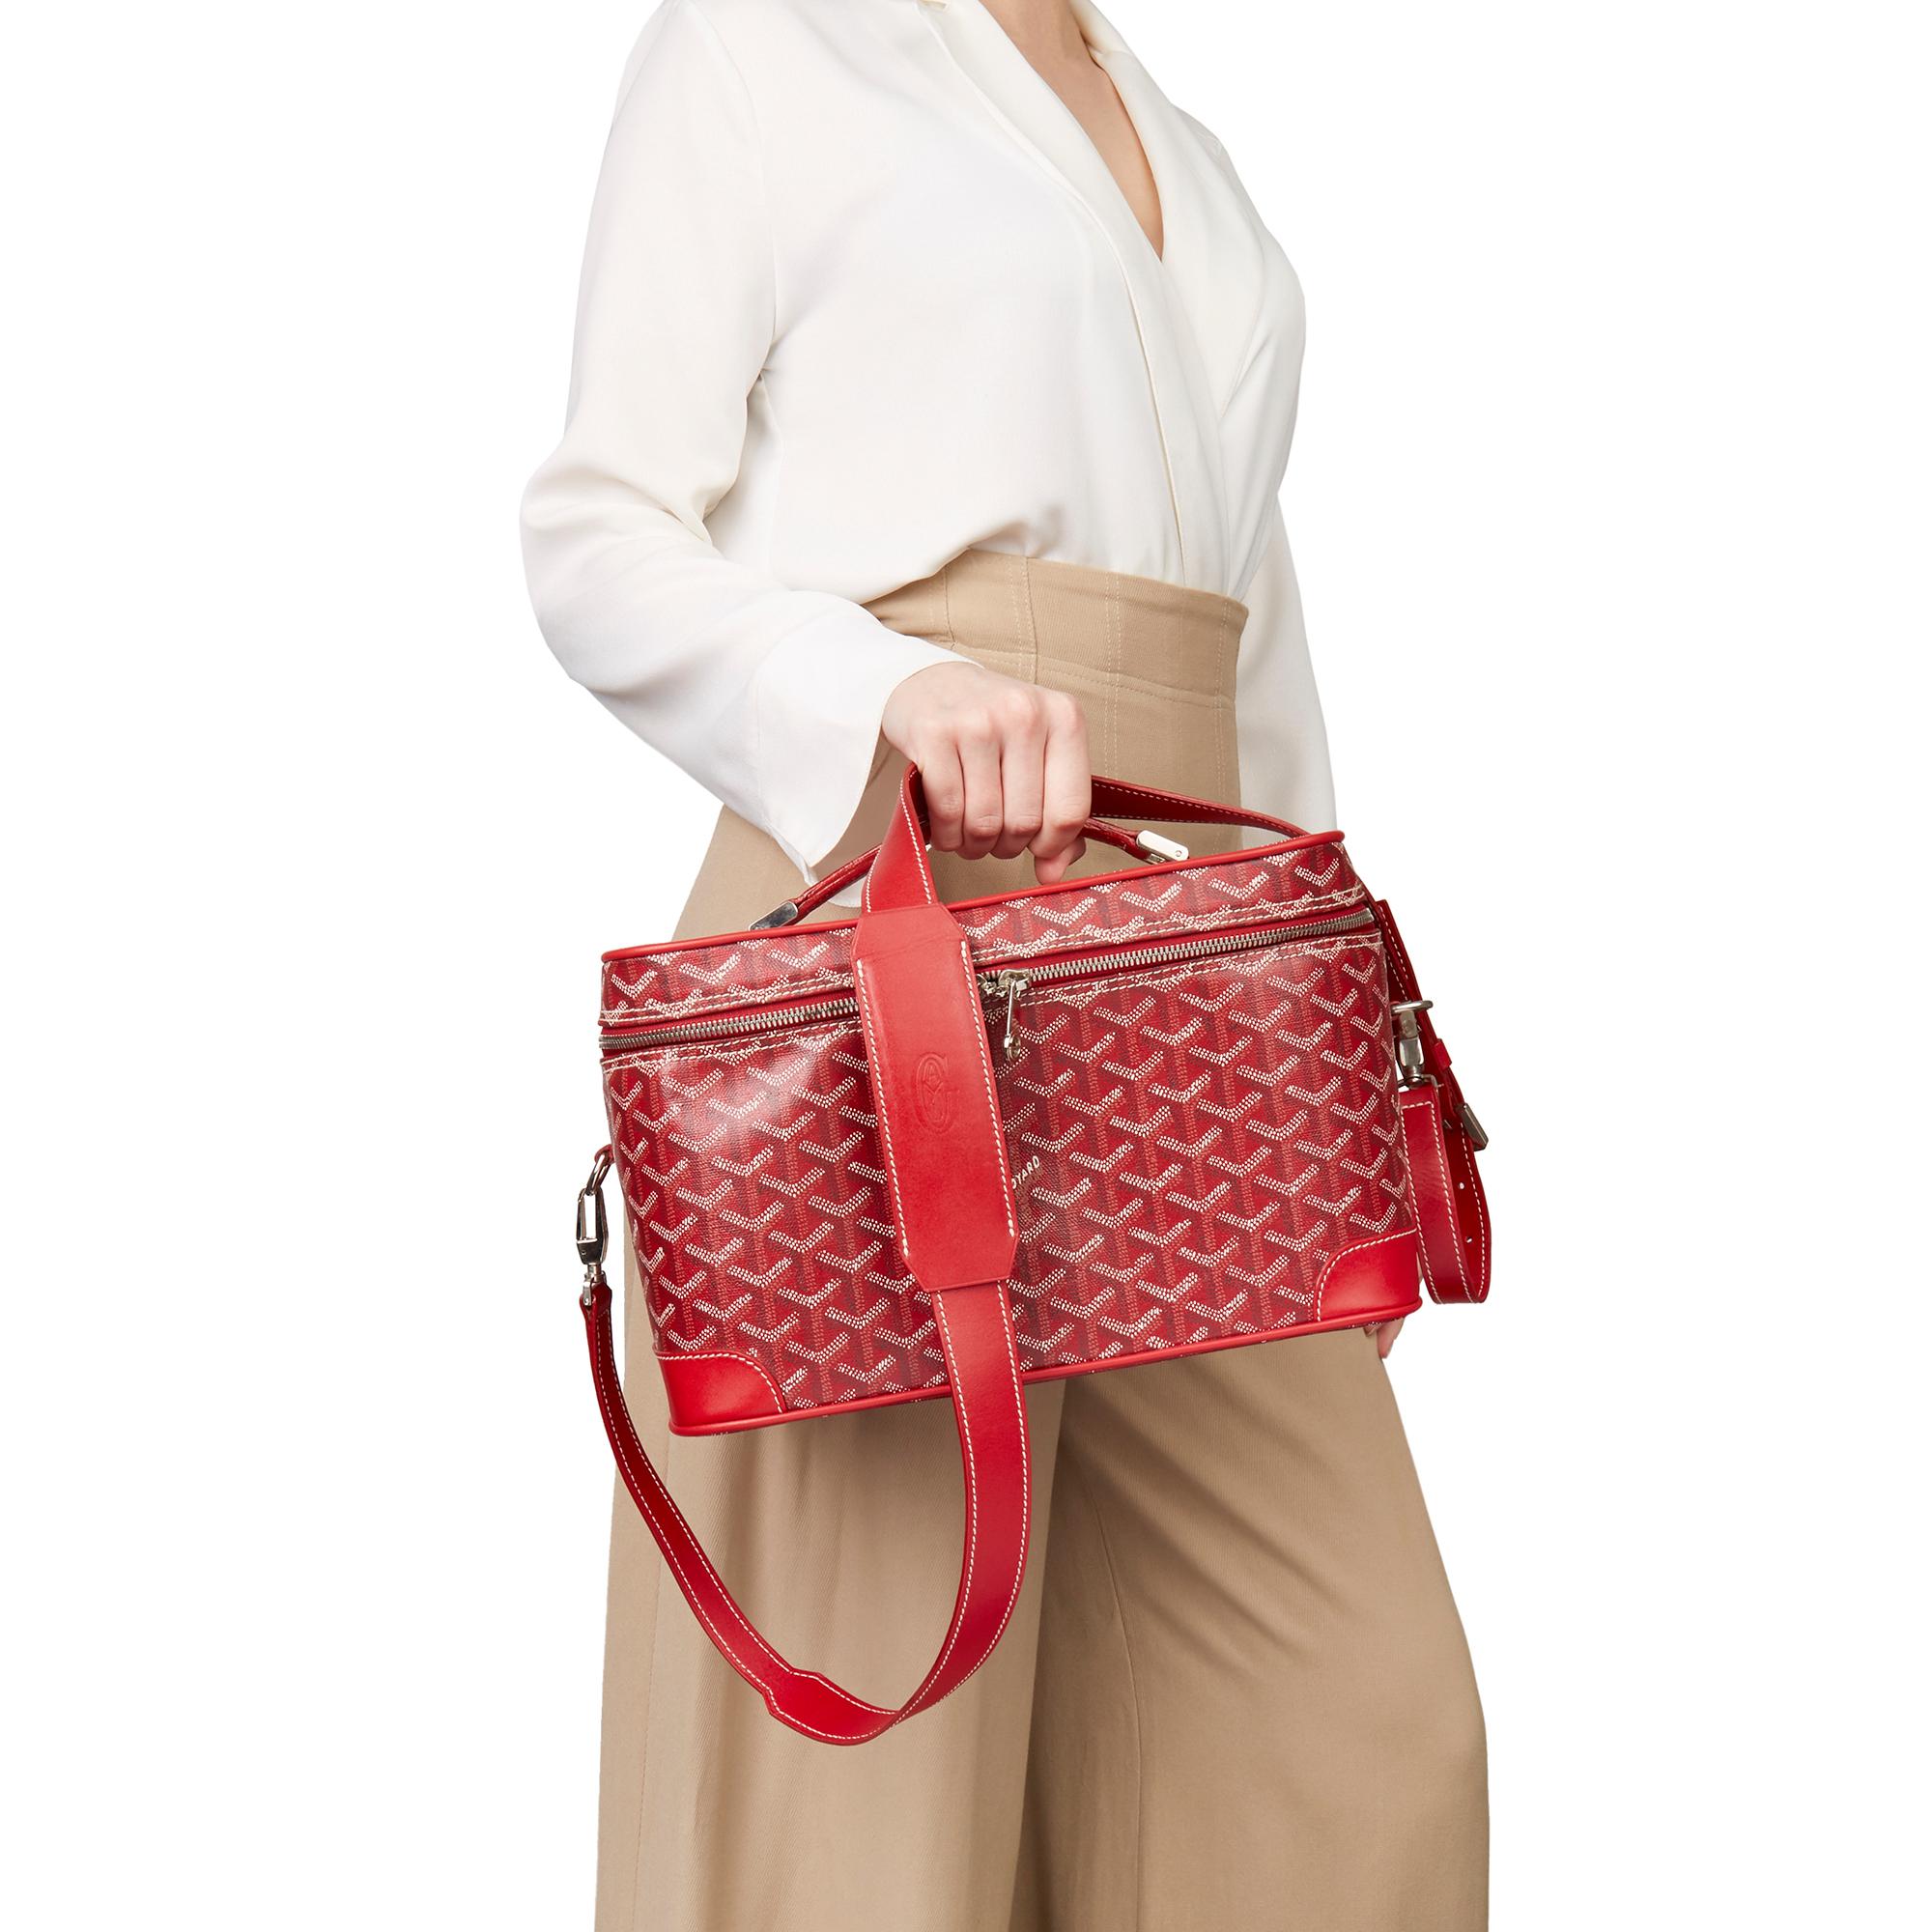 GOYARD
Red Chevron Canvas Train Case

Xupes Reference: HB3302
Serial Number: GOS020045
Age (Circa): 2010
Accompanied By: Padlock, Keys, Shoulder Strap
Authenticity Details: Date Stamp (Made in France)
Gender: Ladies
Type: Travel, Shoulder, Top